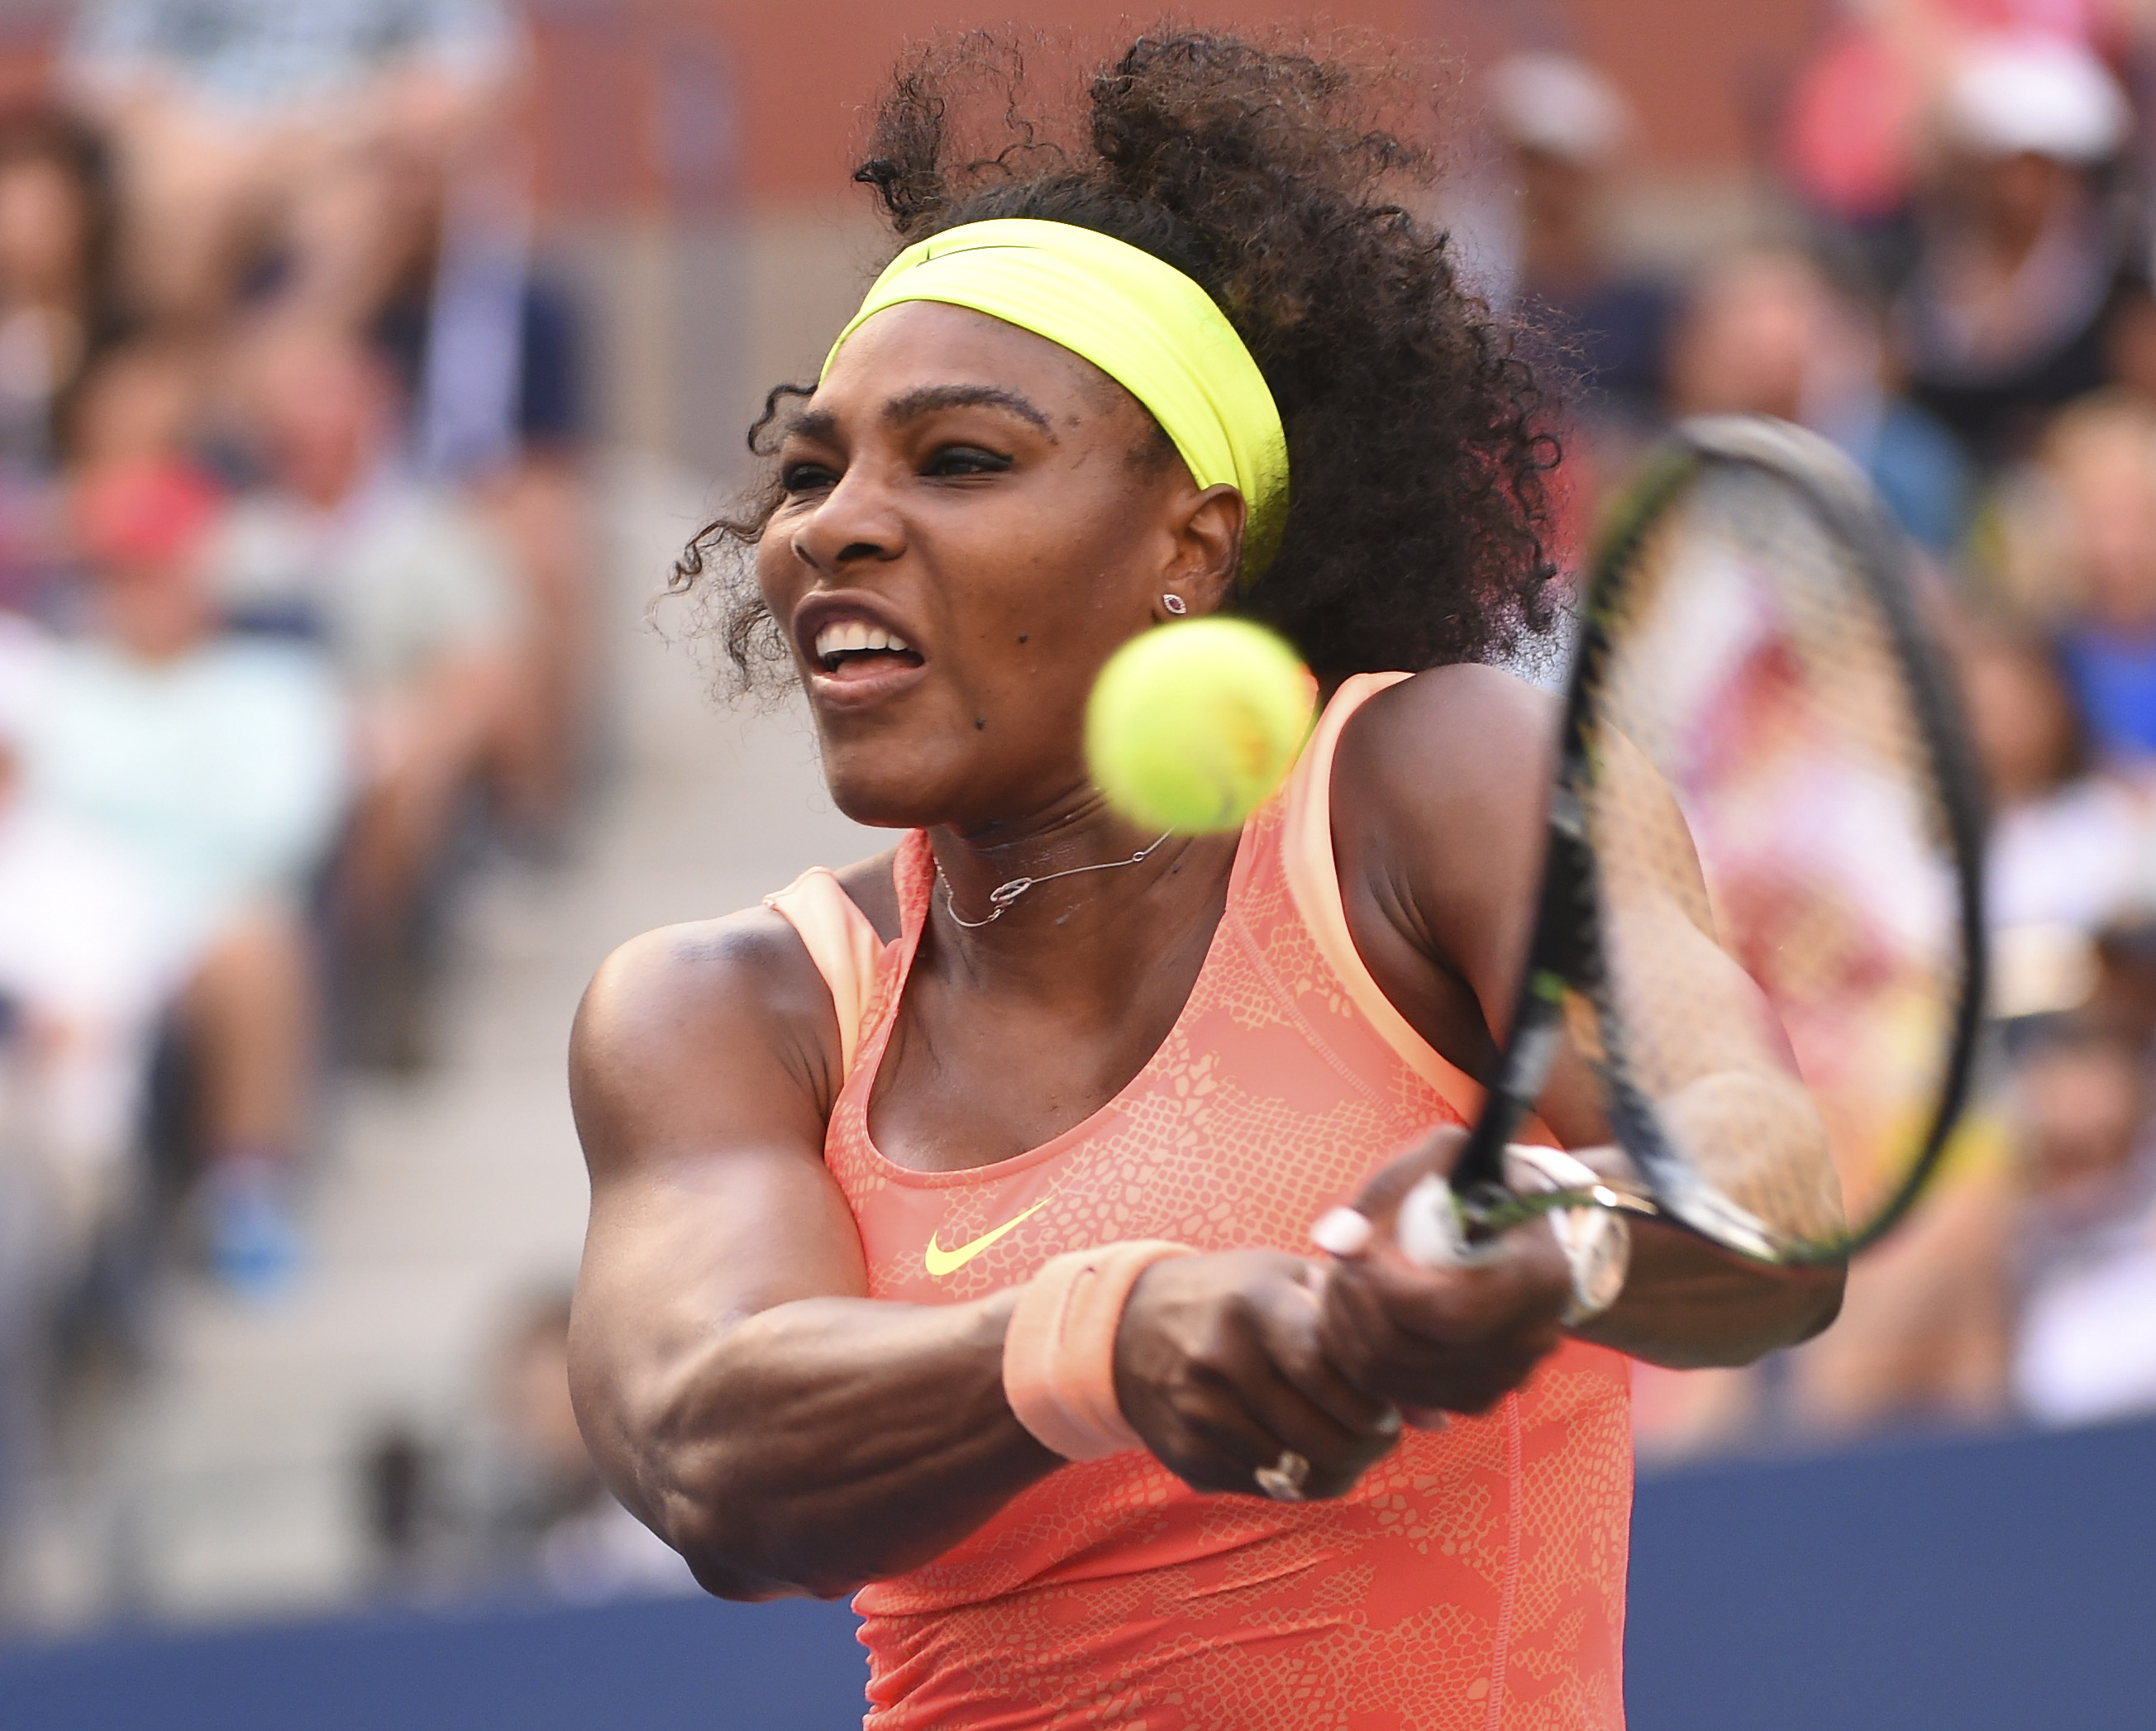 Sep 6, 2015; New York, NY, USA; Serena Williams of the USA hits to Madison Keys of the USA on day seven of the 2015 U.S. Open tennis tournament at USTA Billie Jean King National Tennis Center. Mandatory Credit: Robert Deutsch-USA TODAY Sports